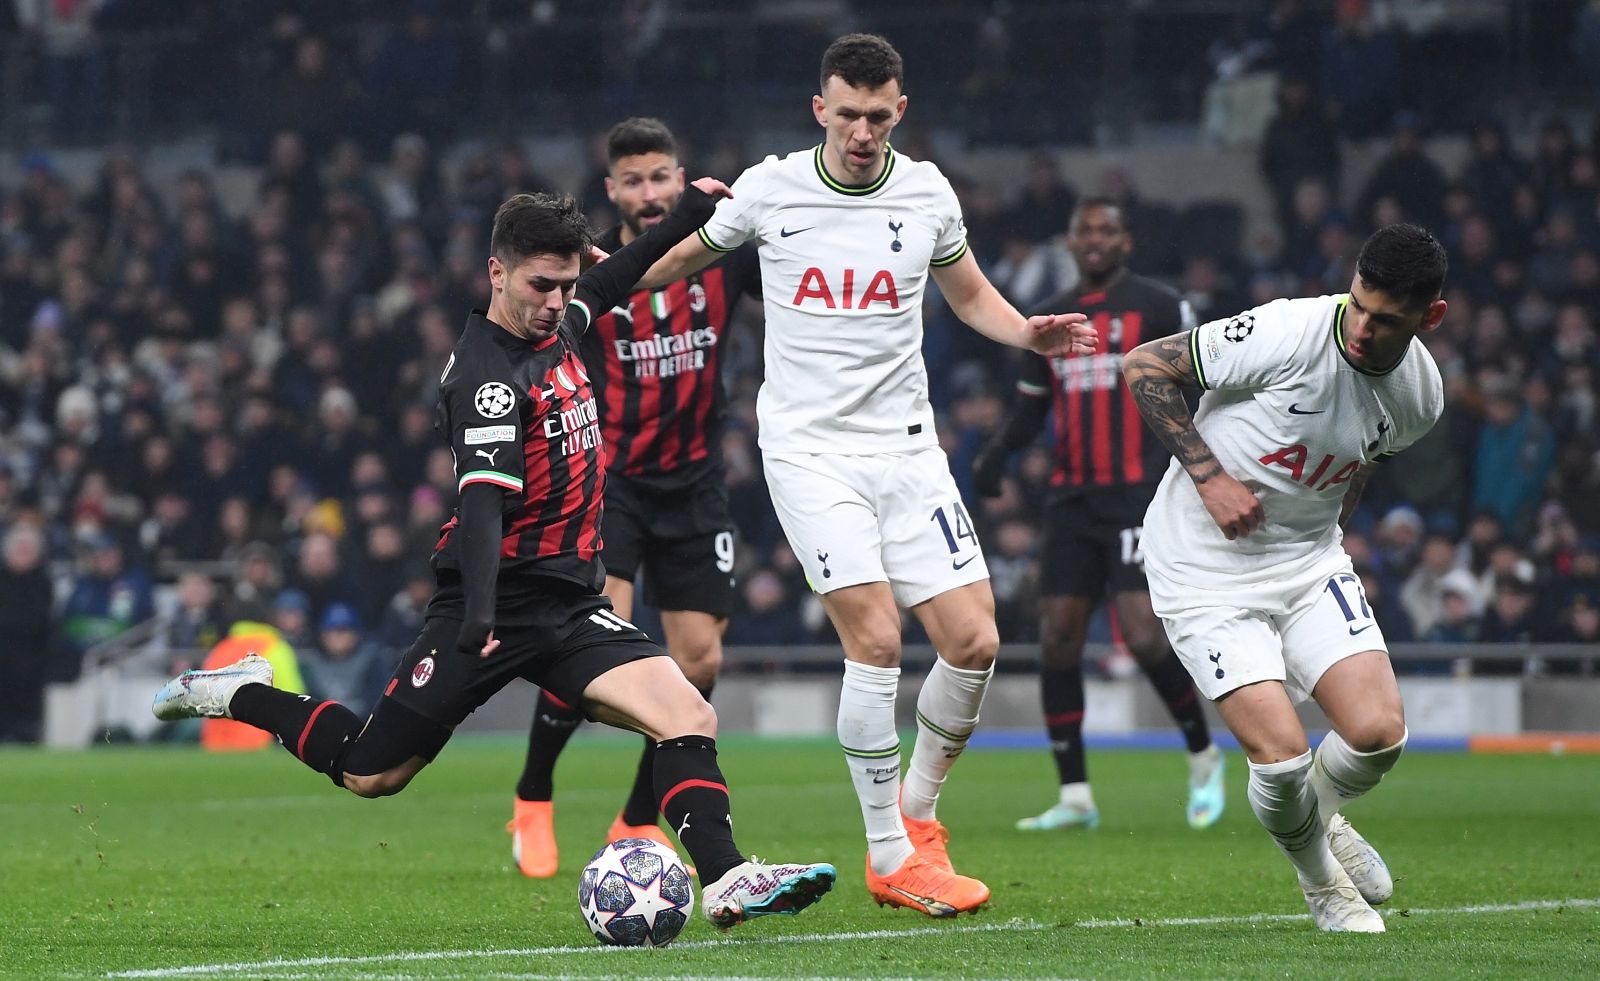 epa10510371 AC Milan's Brahim Diaz (L) takes a shot on goal as Tottenham's Ivan Perisic (C) and Rafael Leao (R) look on during the UEFA Champions League, Round of 16, 2nd leg match between Tottenham Hotspur and AC Milan in London, Britain, 08 March 2023.  EPA/Andy Rain